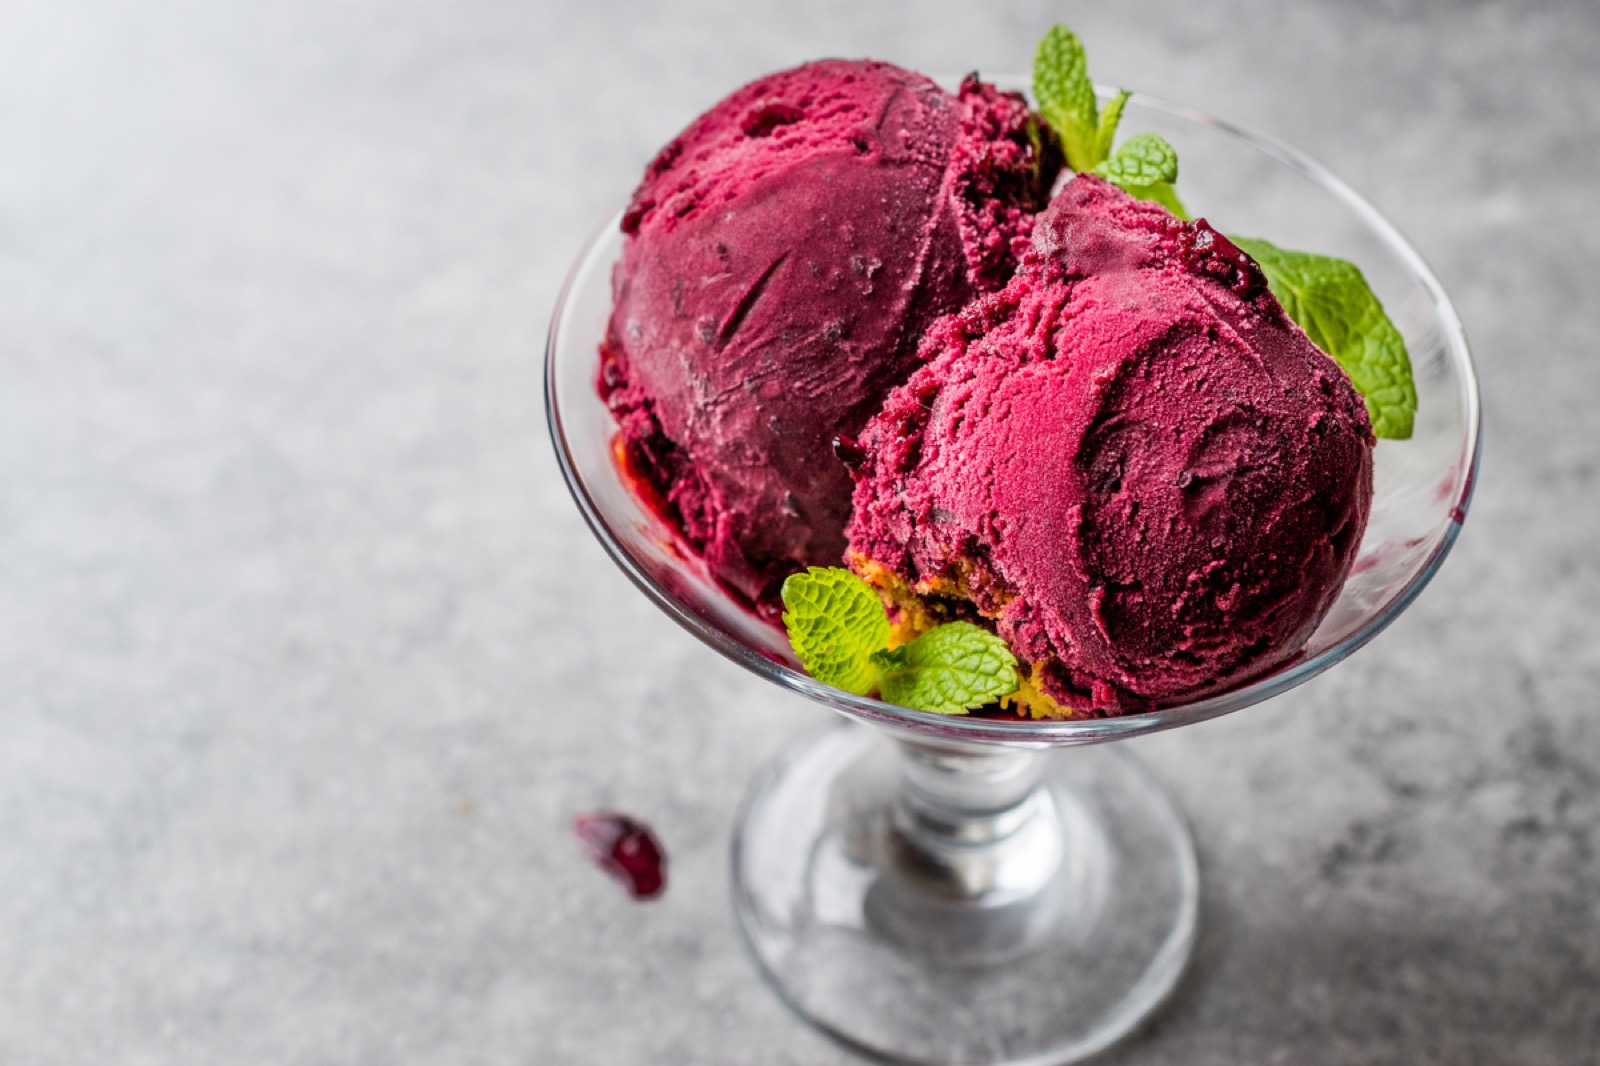 🍦 It’s Time to Vote “Yay” Or “Nay” On These Unusual Ice Cream Flavors Beets ice cream